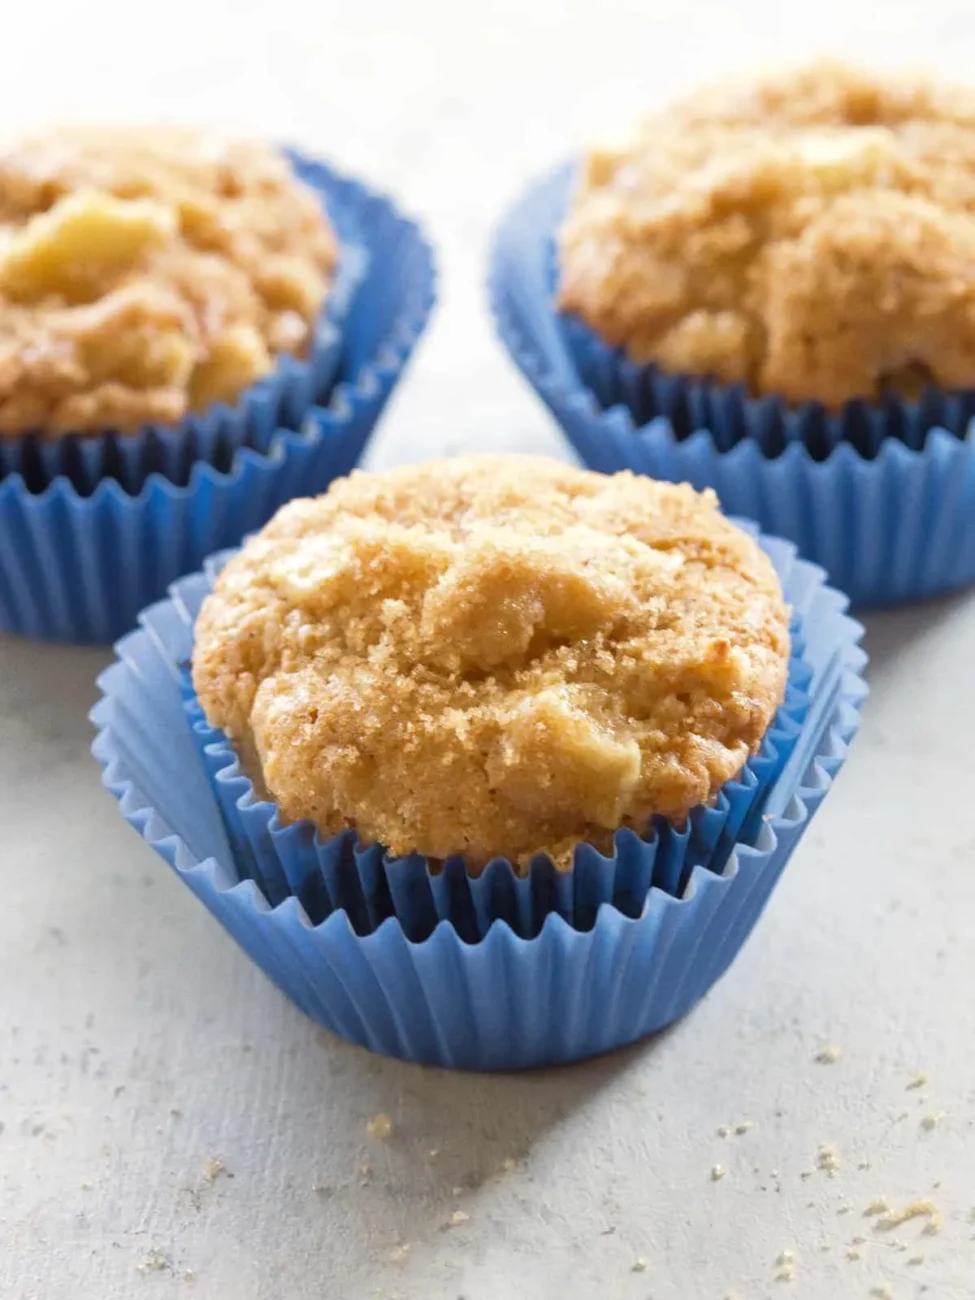 Nutritious Apple Muffin Delights: A Heart-Healthy Snack Recipe